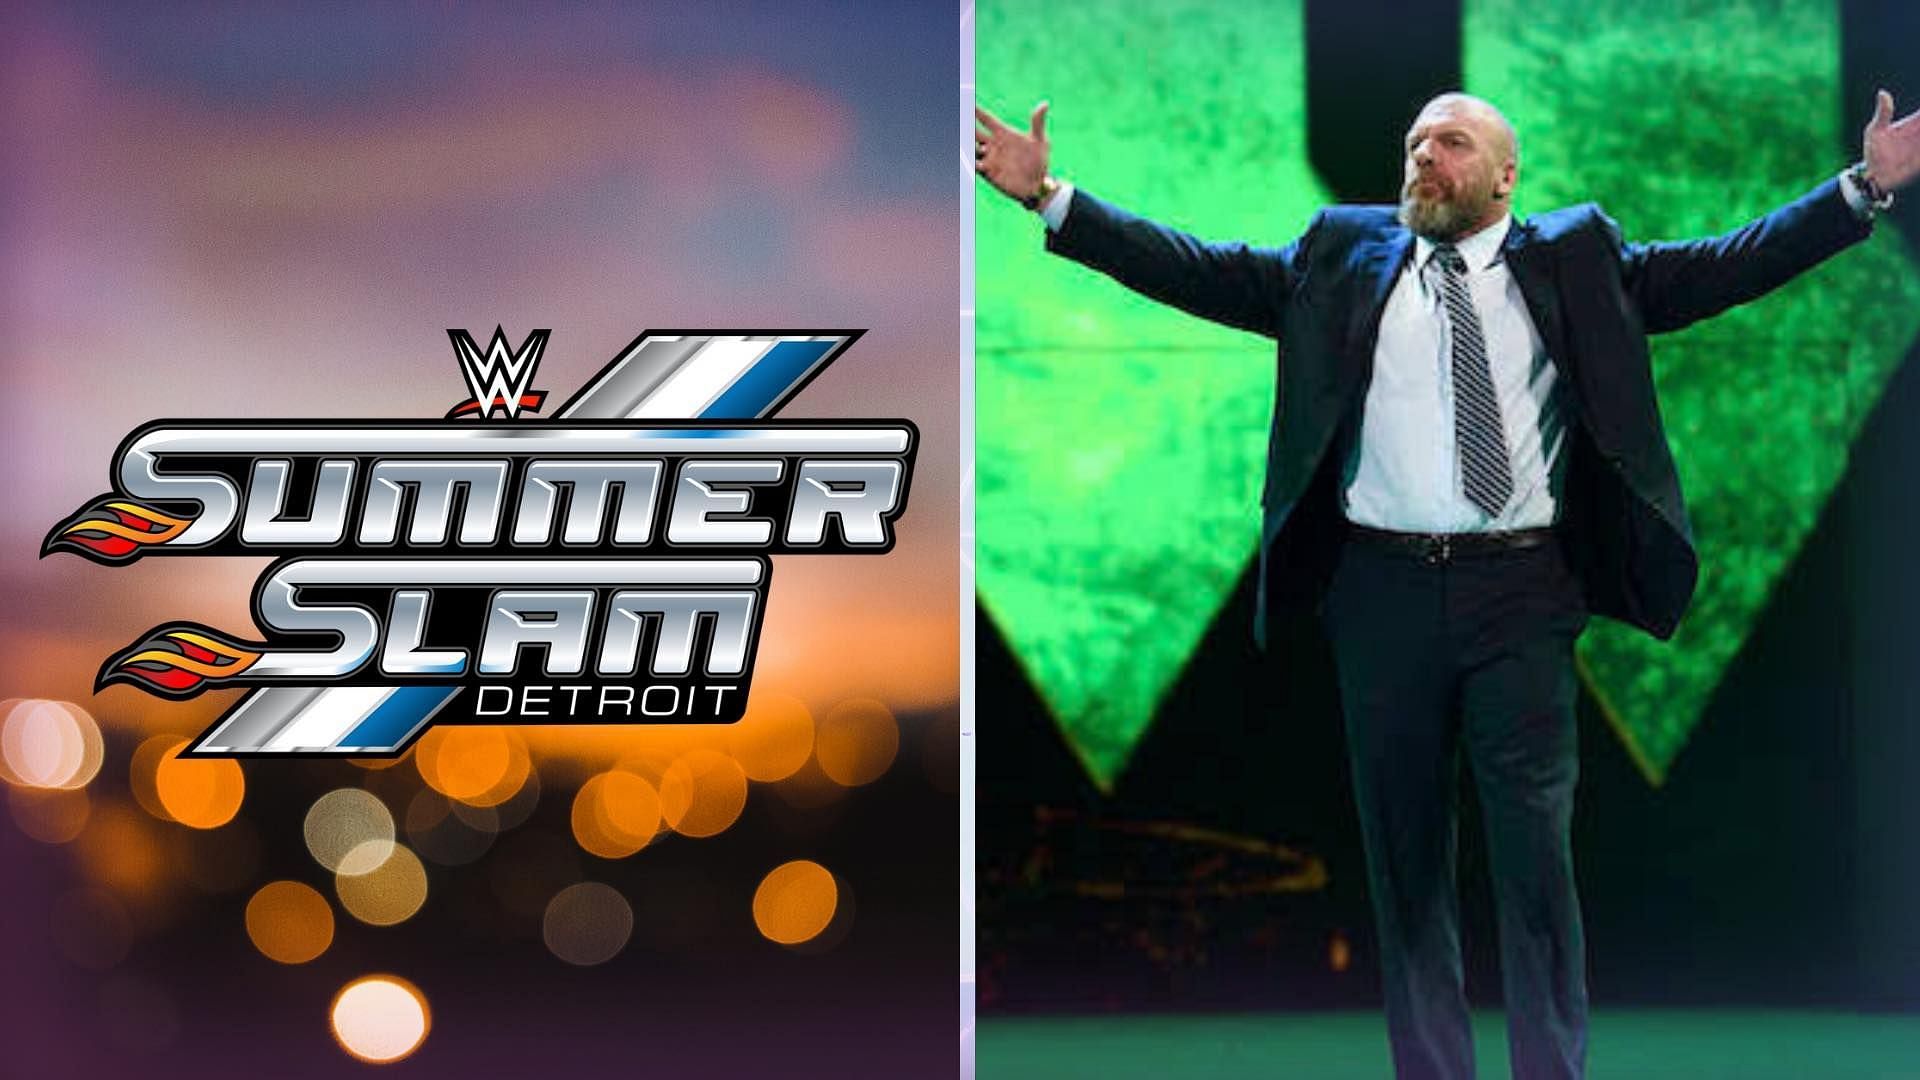 Several WWE Superstars need to return to television after SummerSlam